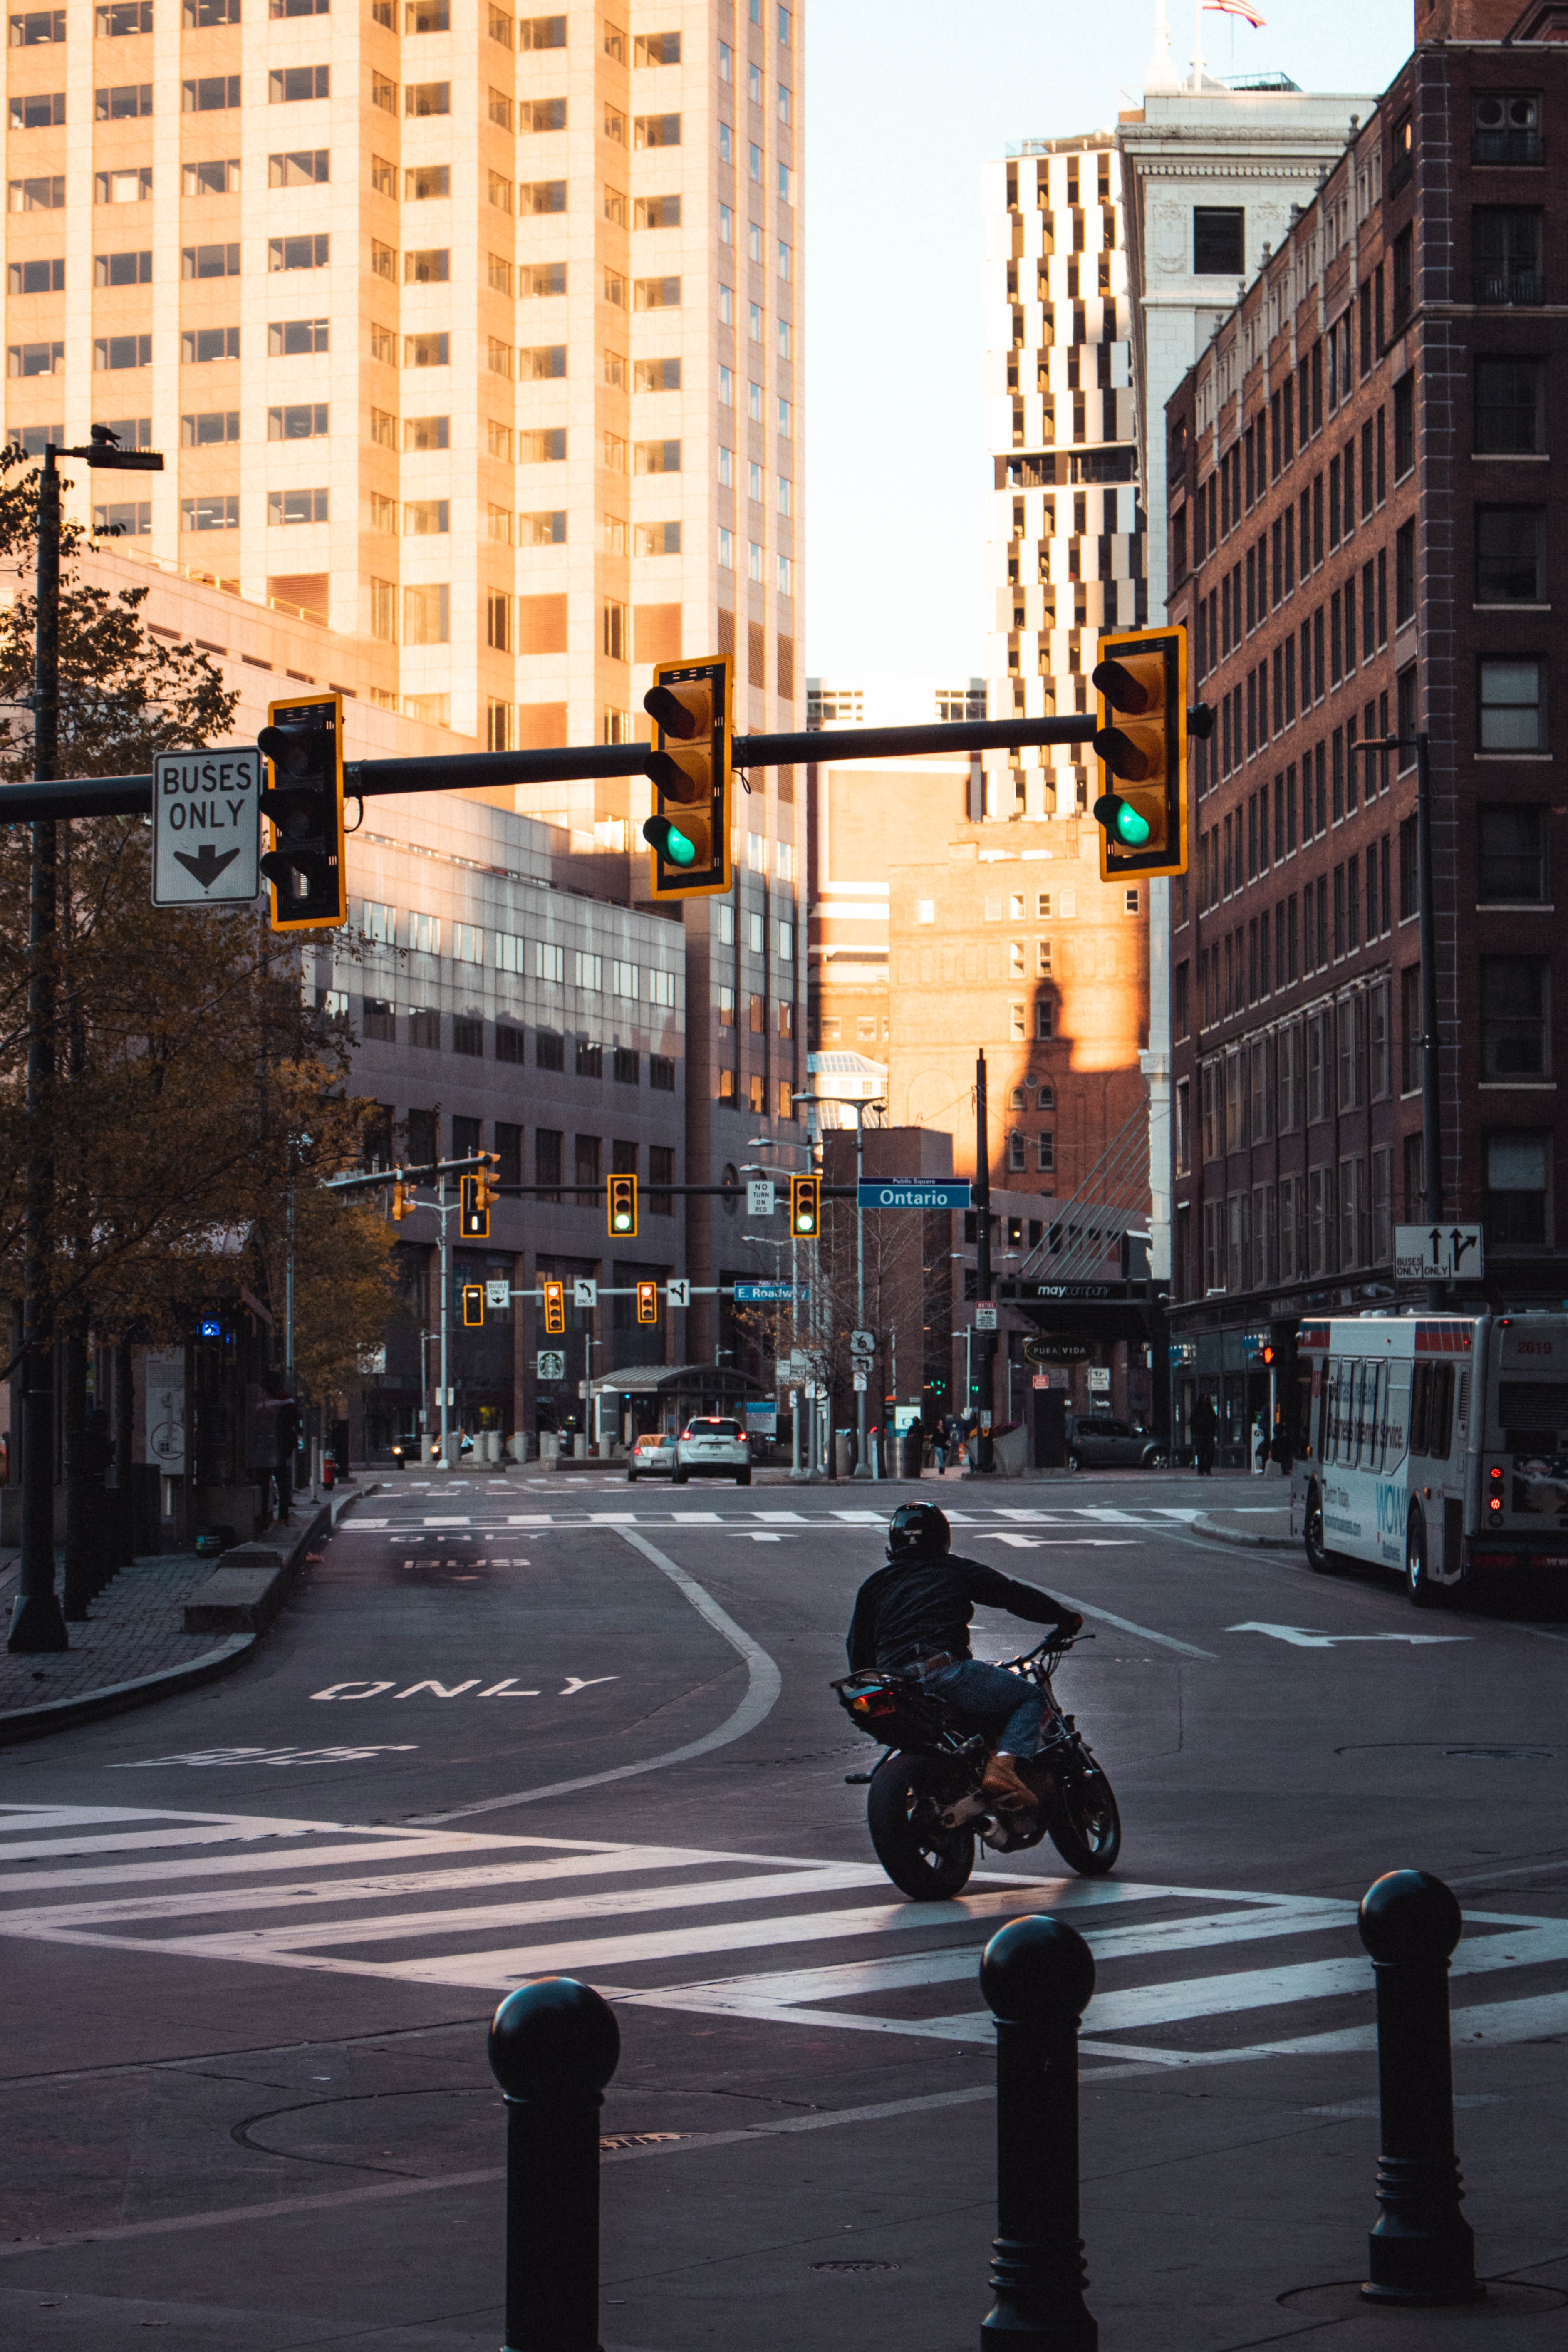 motorcycles, traffic lights, black, city, road, motorcyclist, motorcycle